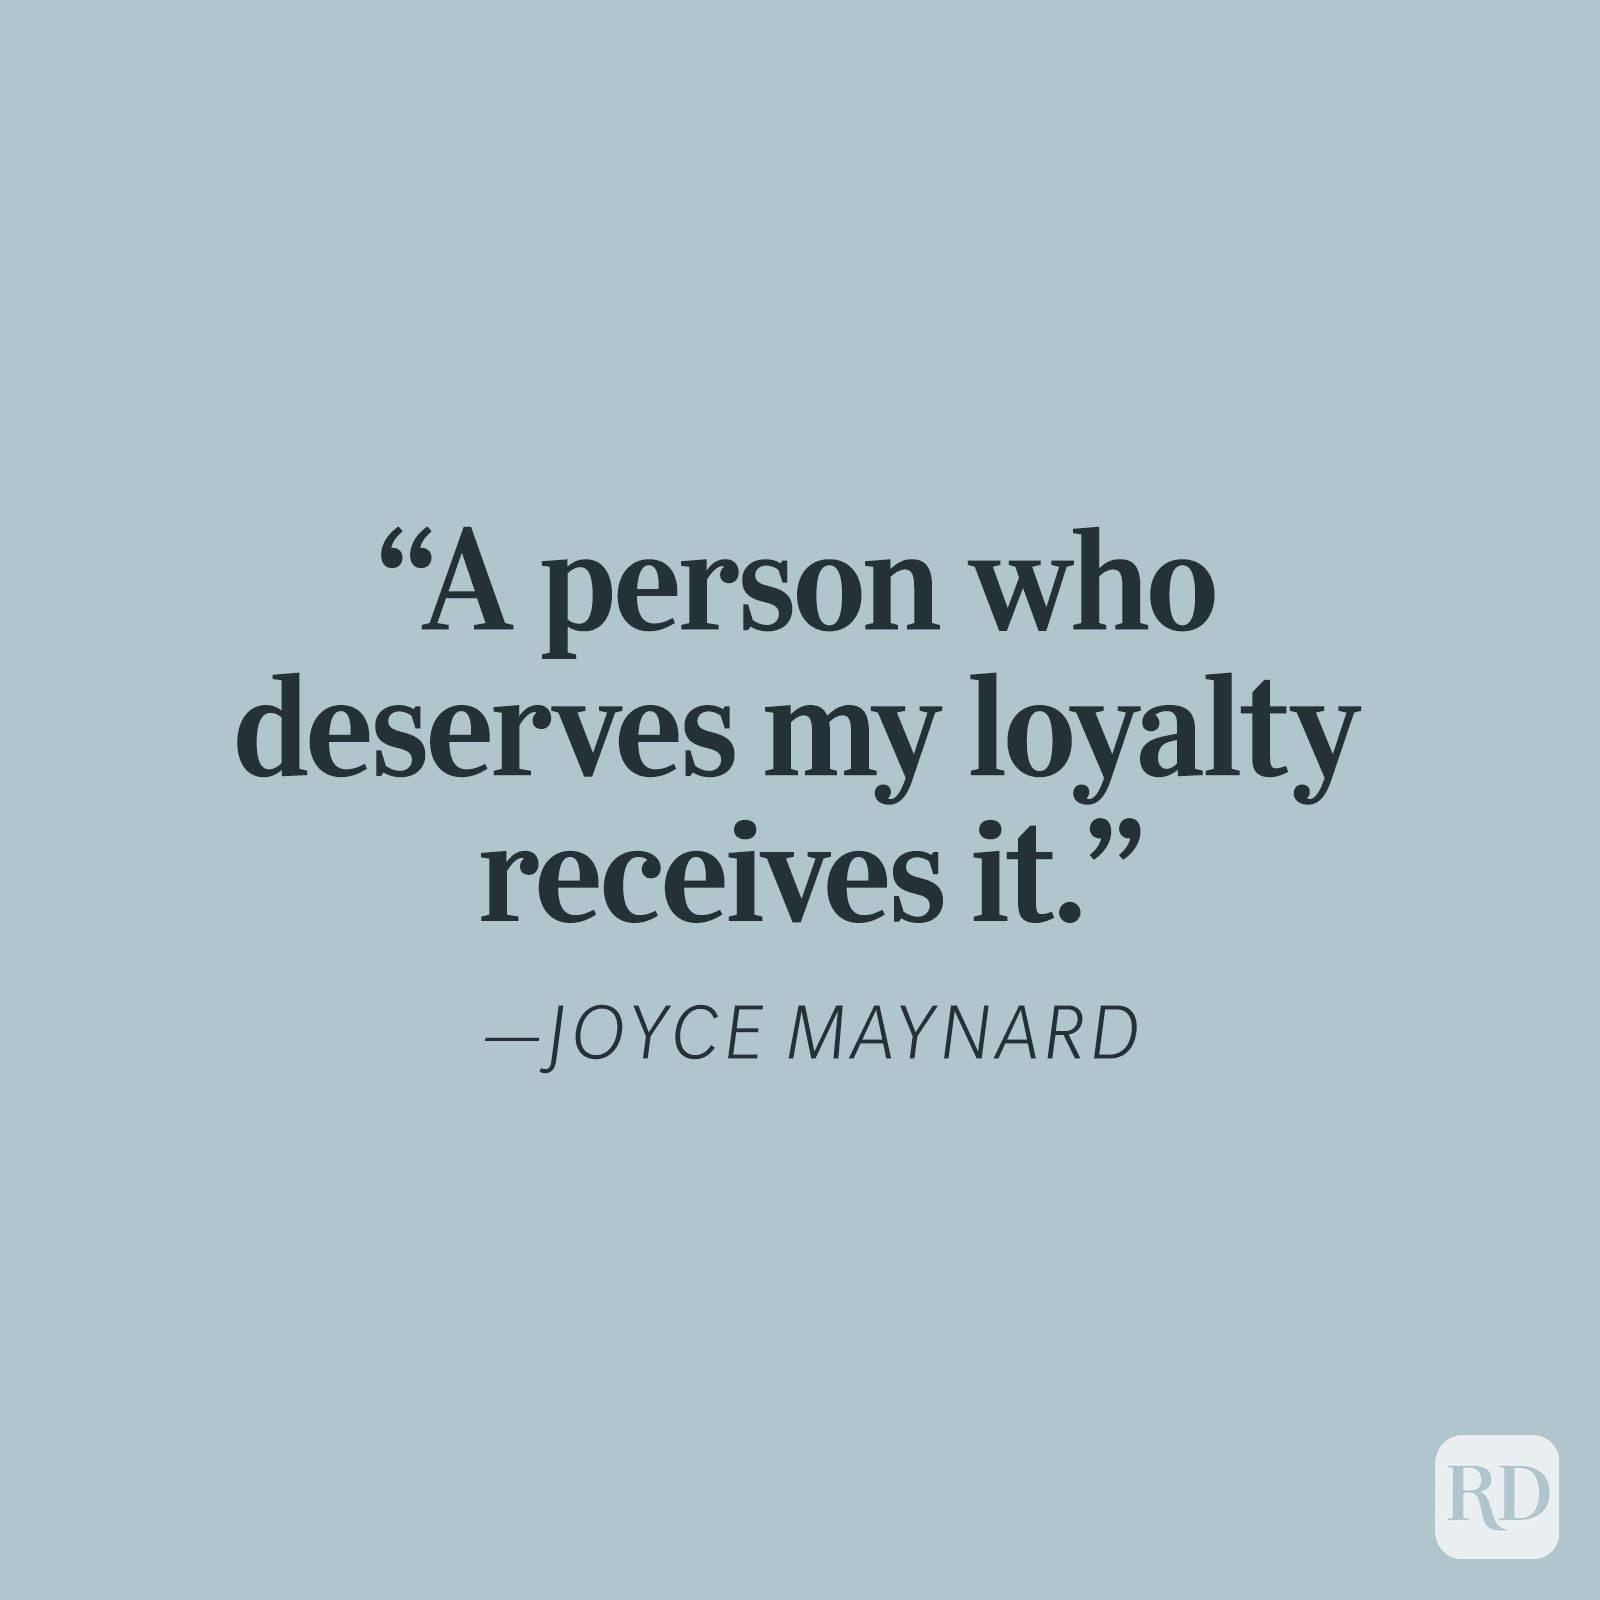 96 Best Loyalty Quotes: Thoughtful and Meaningful Sayings | Trusted ...